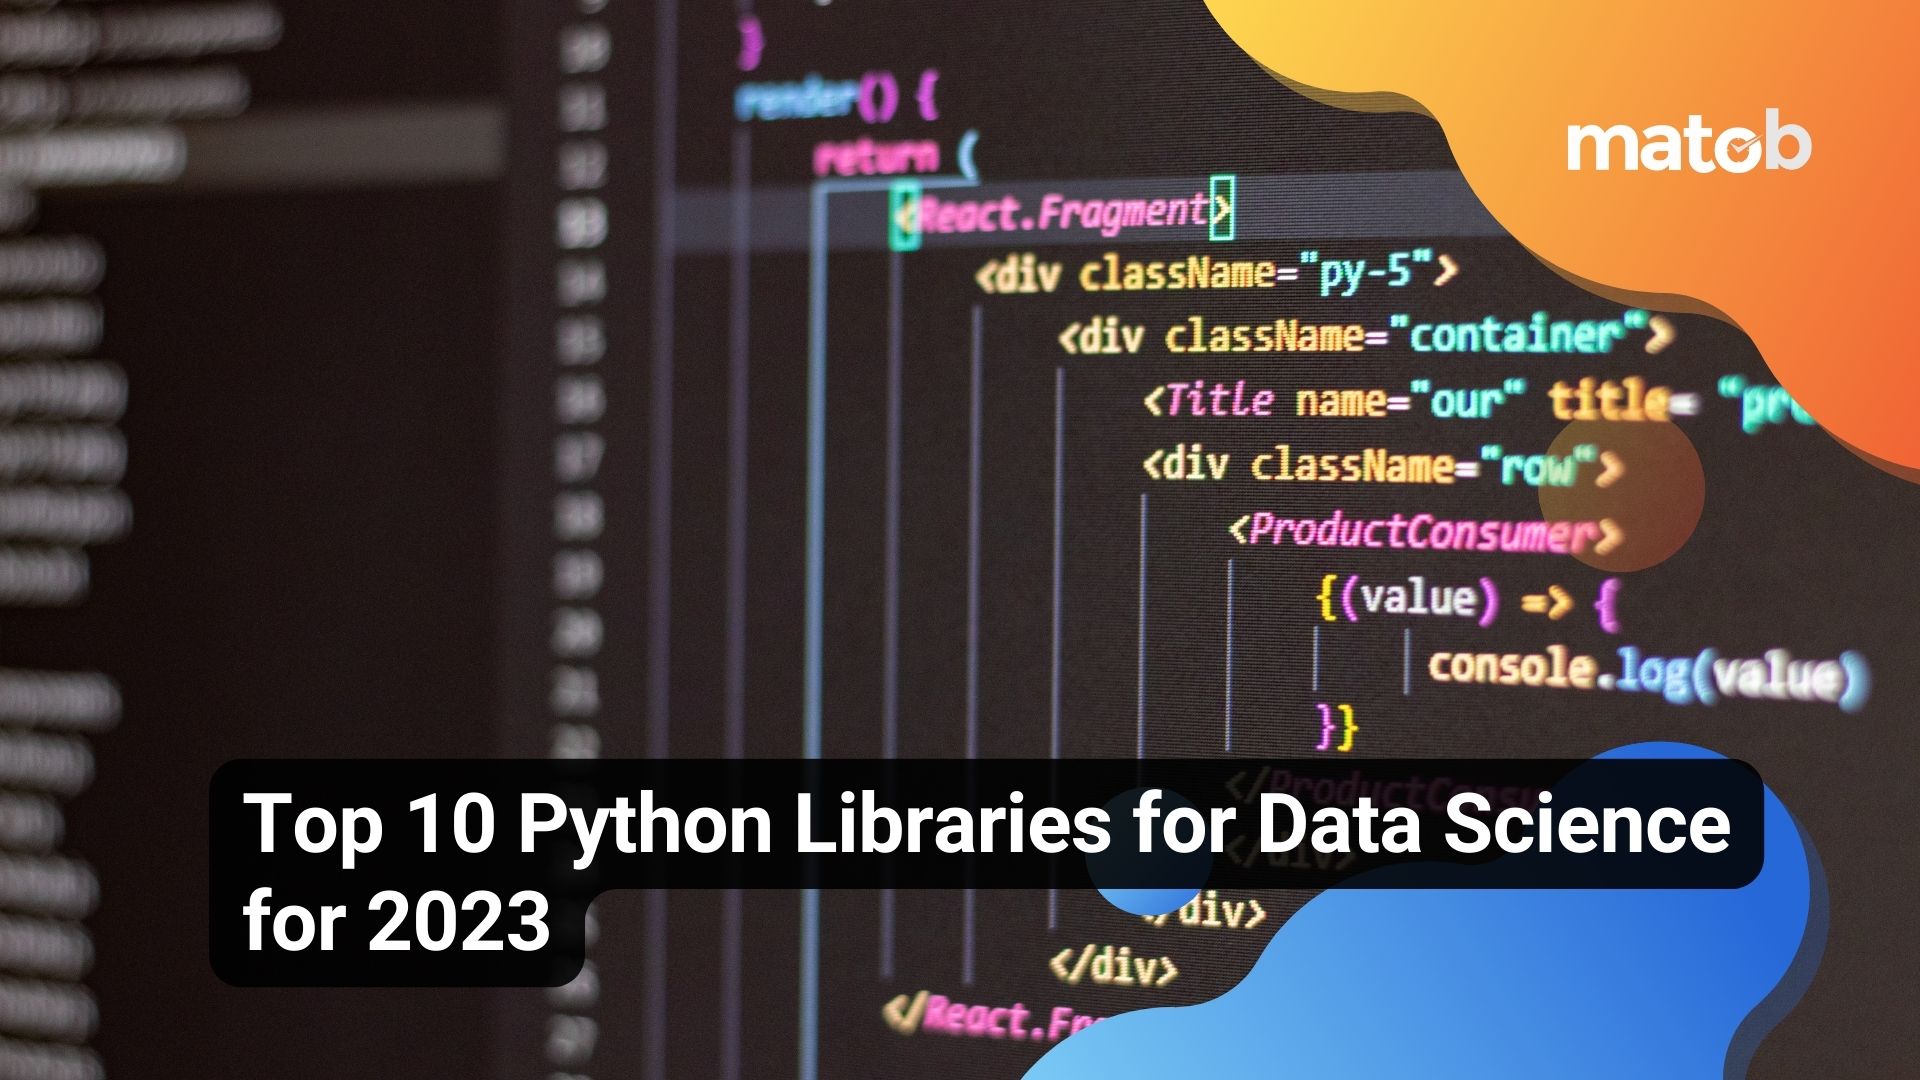 Top 10 Python Libraries for Data Science for 2023